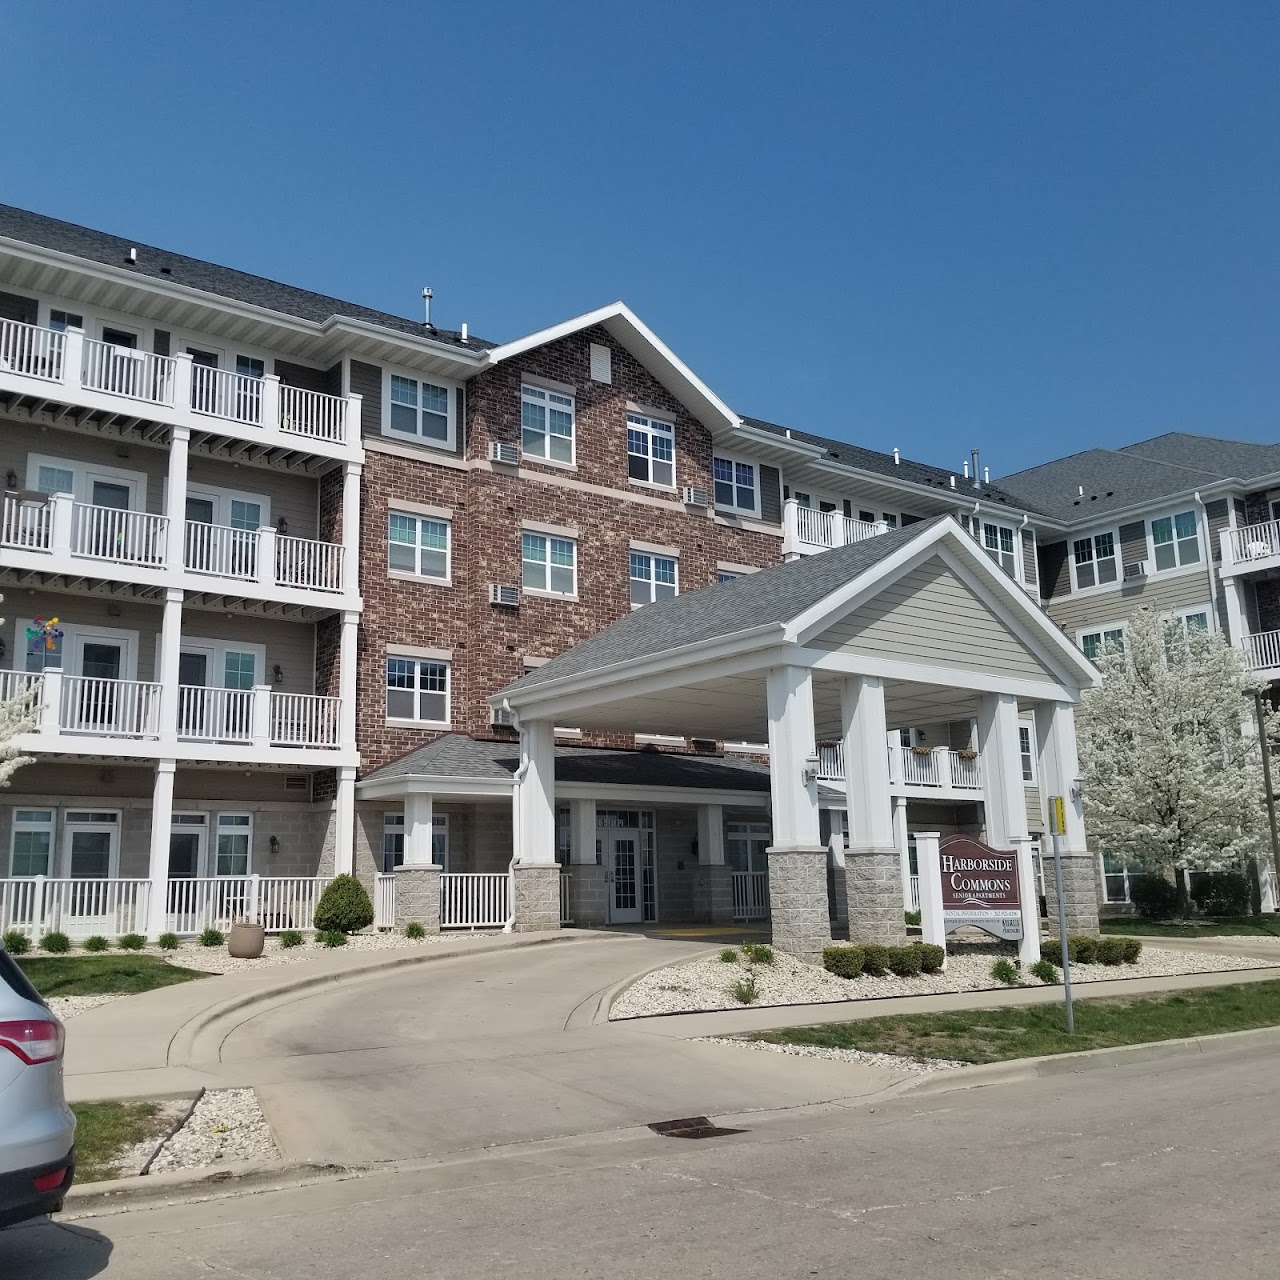 Photo of HARBORSIDE COMMONS. Affordable housing located at 716 51ST PLACE KENOSHA, WI 53140